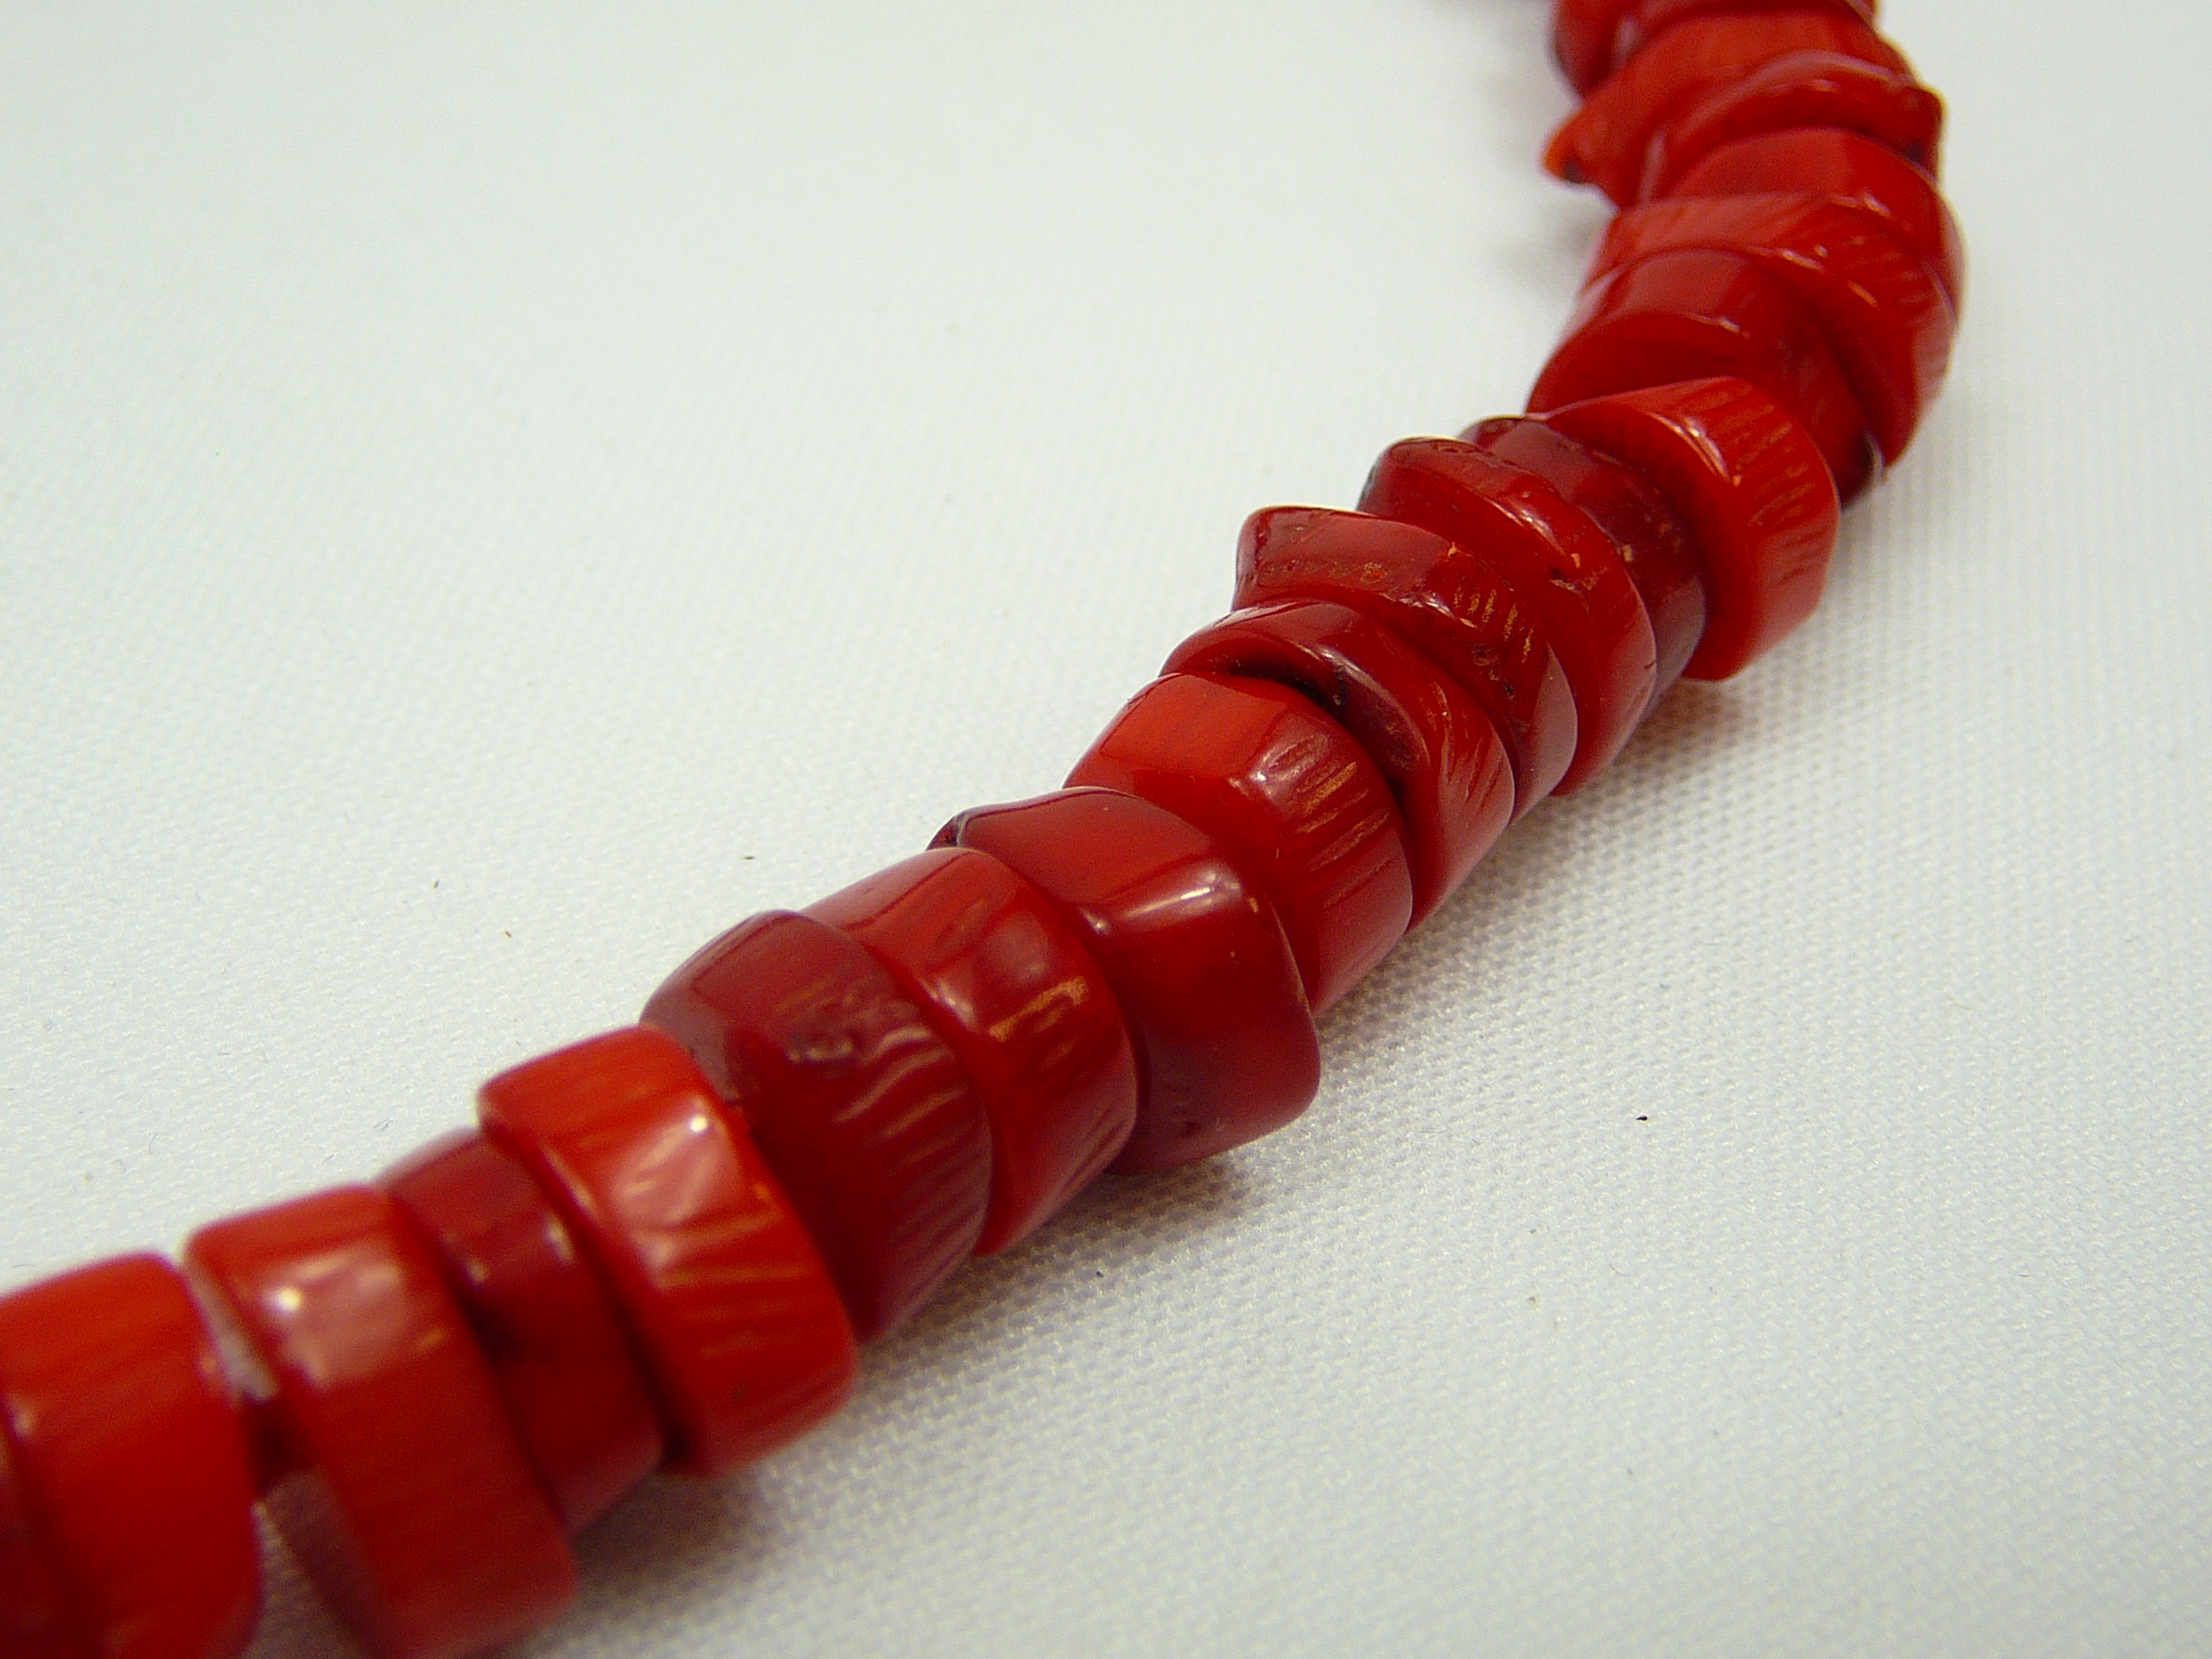 Heavy coral bead necklace - Image 2 of 2